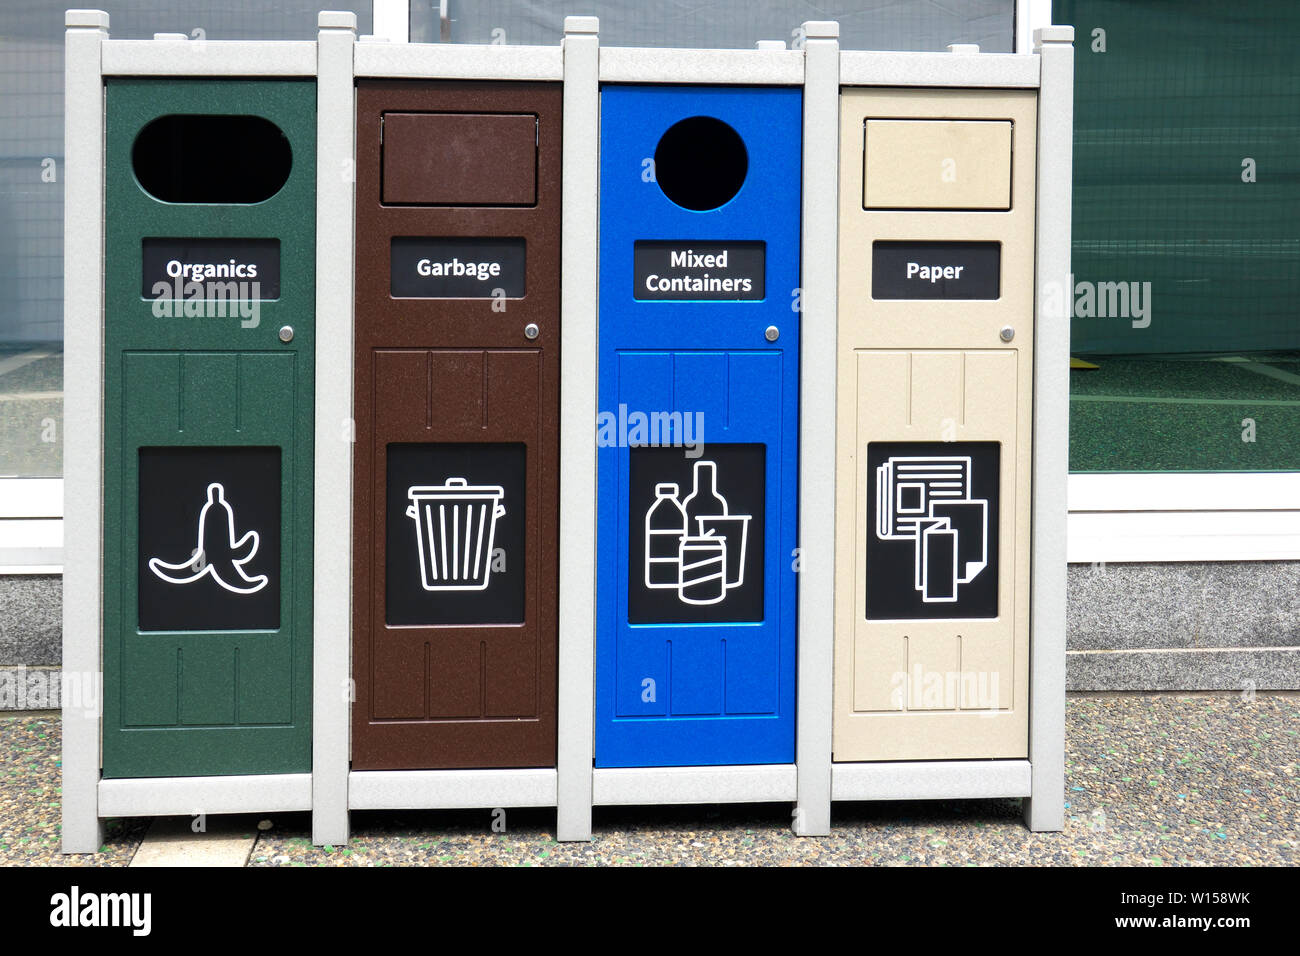 Recycling container with separate bins for organics, garbage, mixed containers and paper.  Vancouver, B. C. Stock Photo